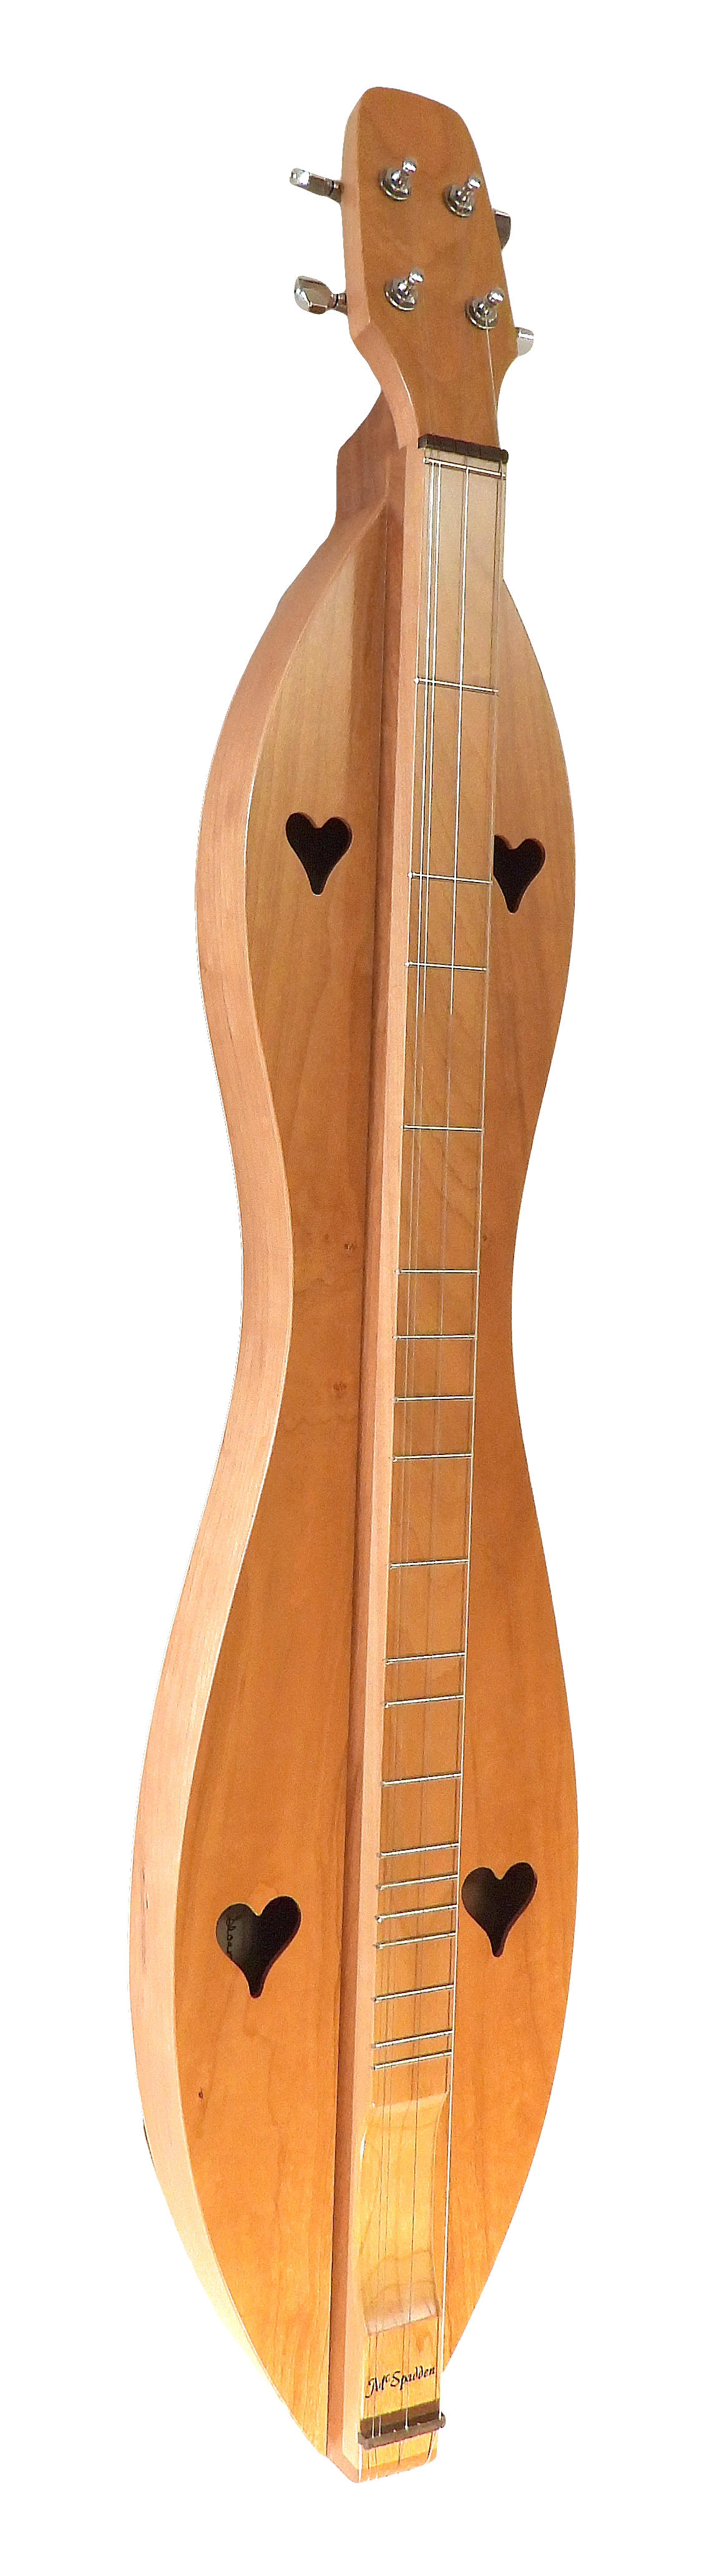 This 4 String, Flathead, Hourglass, with Cherry top, back and sides (4FHCC) features beautiful birds designs on a wooden body.